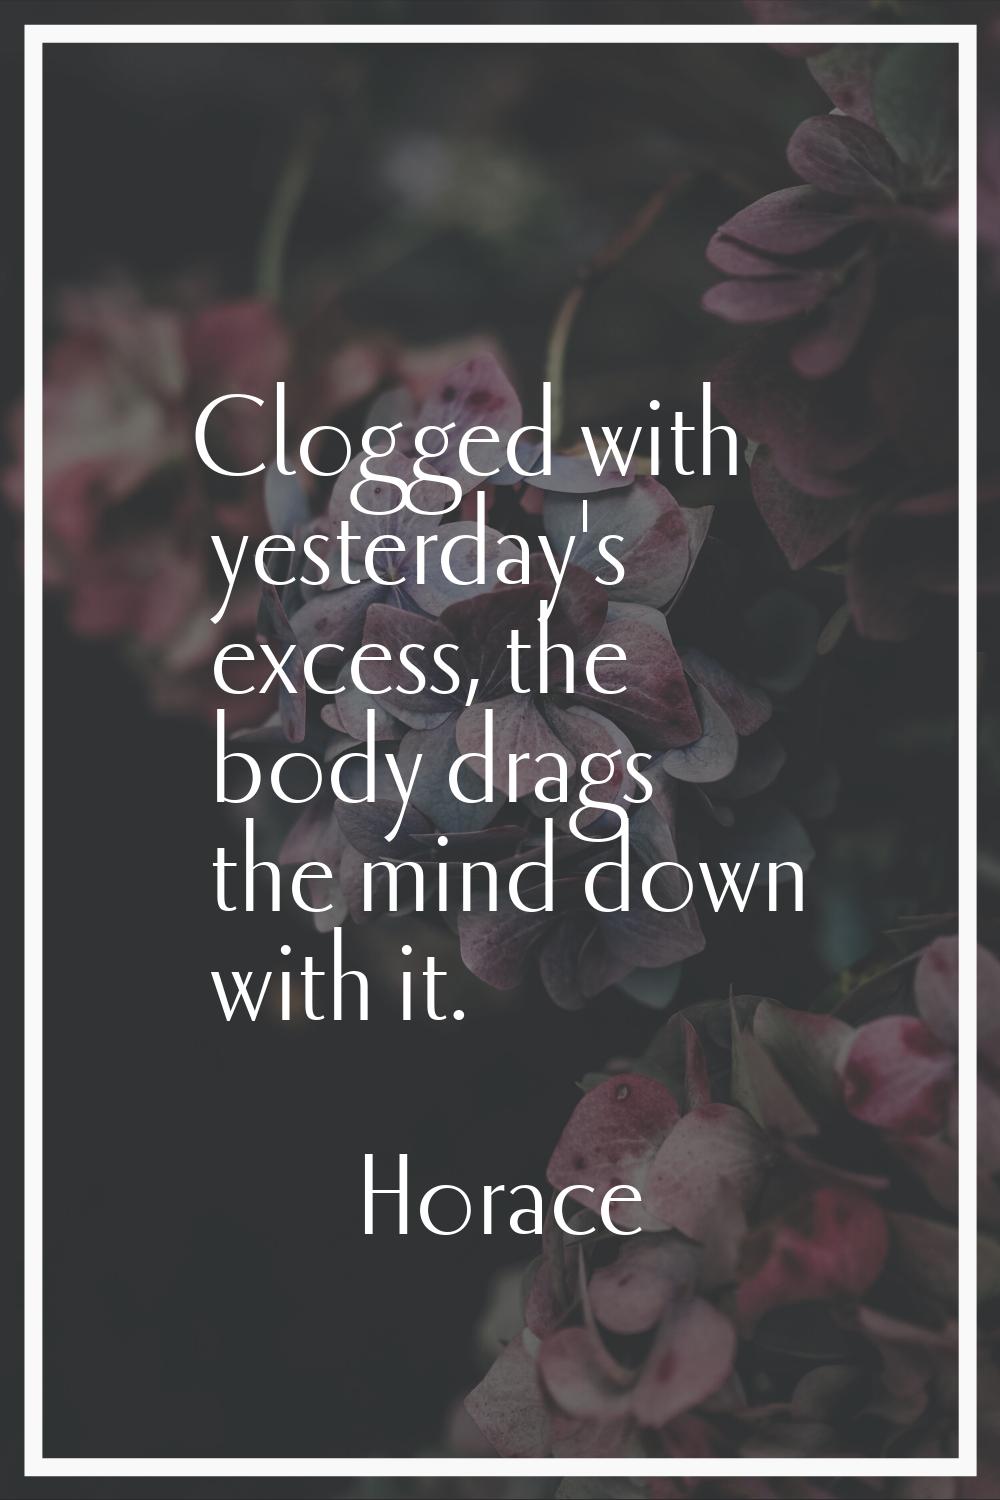 Clogged with yesterday's excess, the body drags the mind down with it.